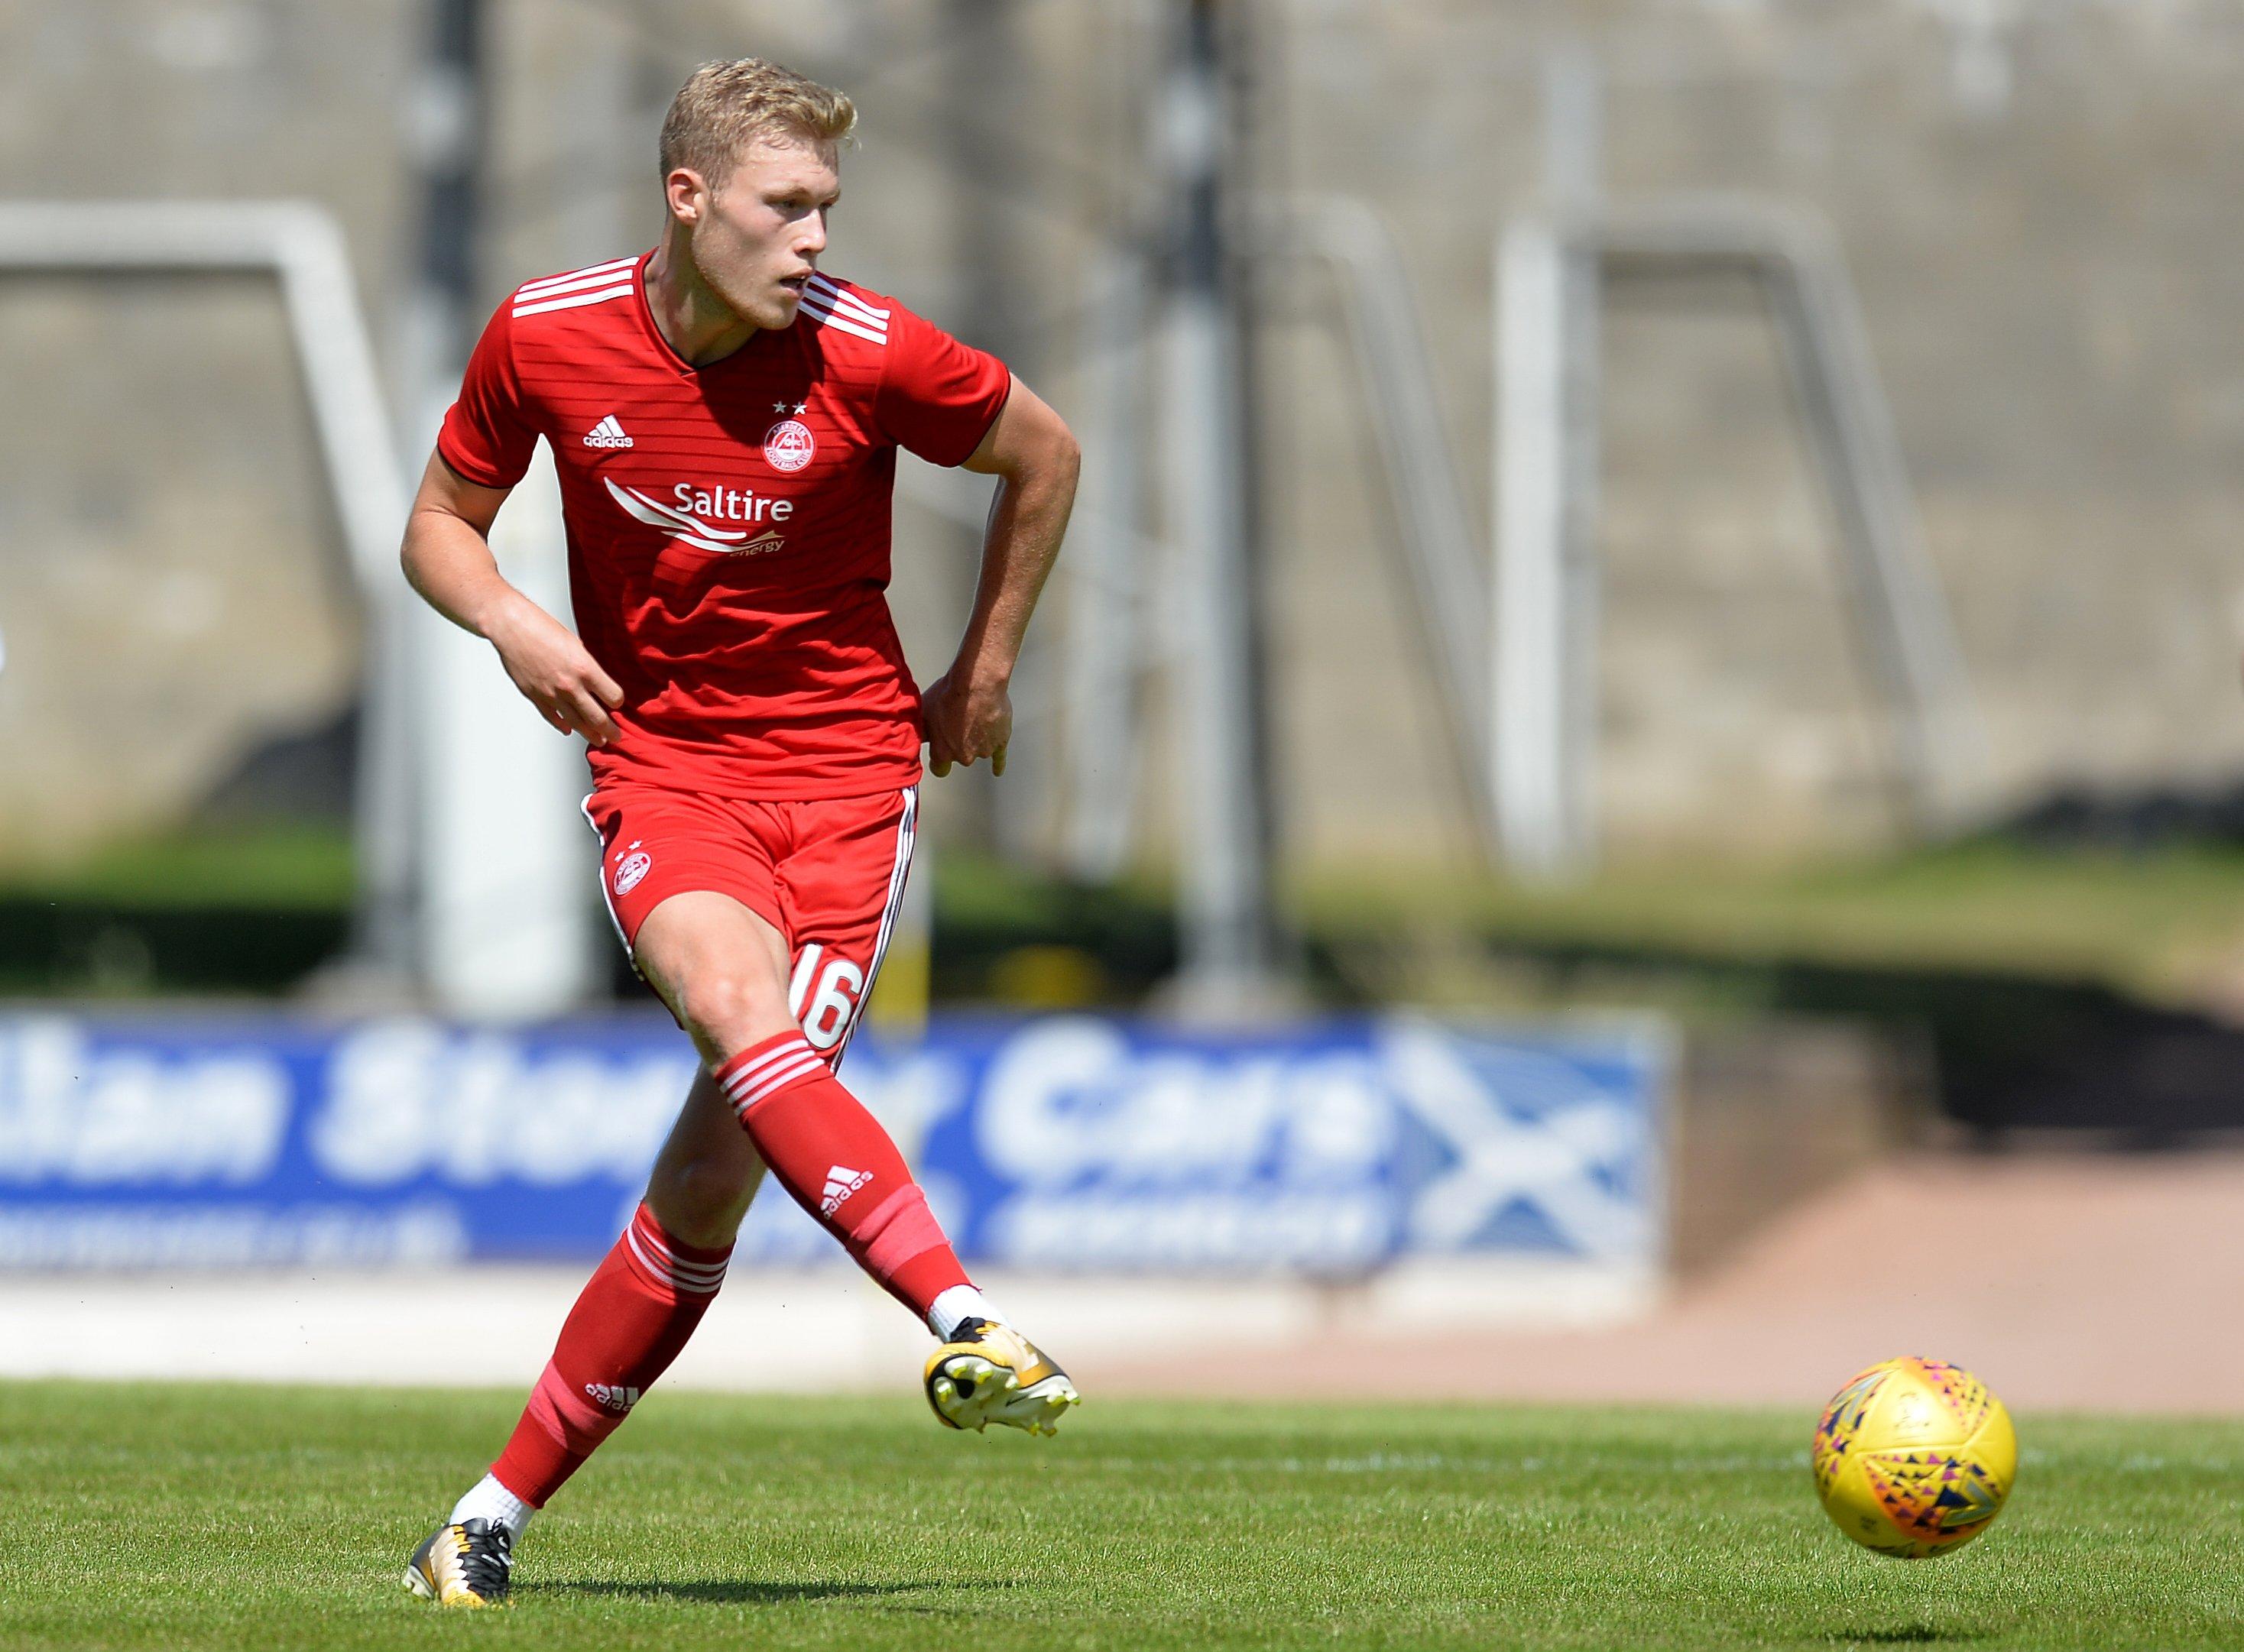 Middlesbrough transfer round-up: Middlesbrough, Derby County, Stoke City and other all vying for signature of Aberdeen striker Sam Cosgrove - Hartlepool Mail